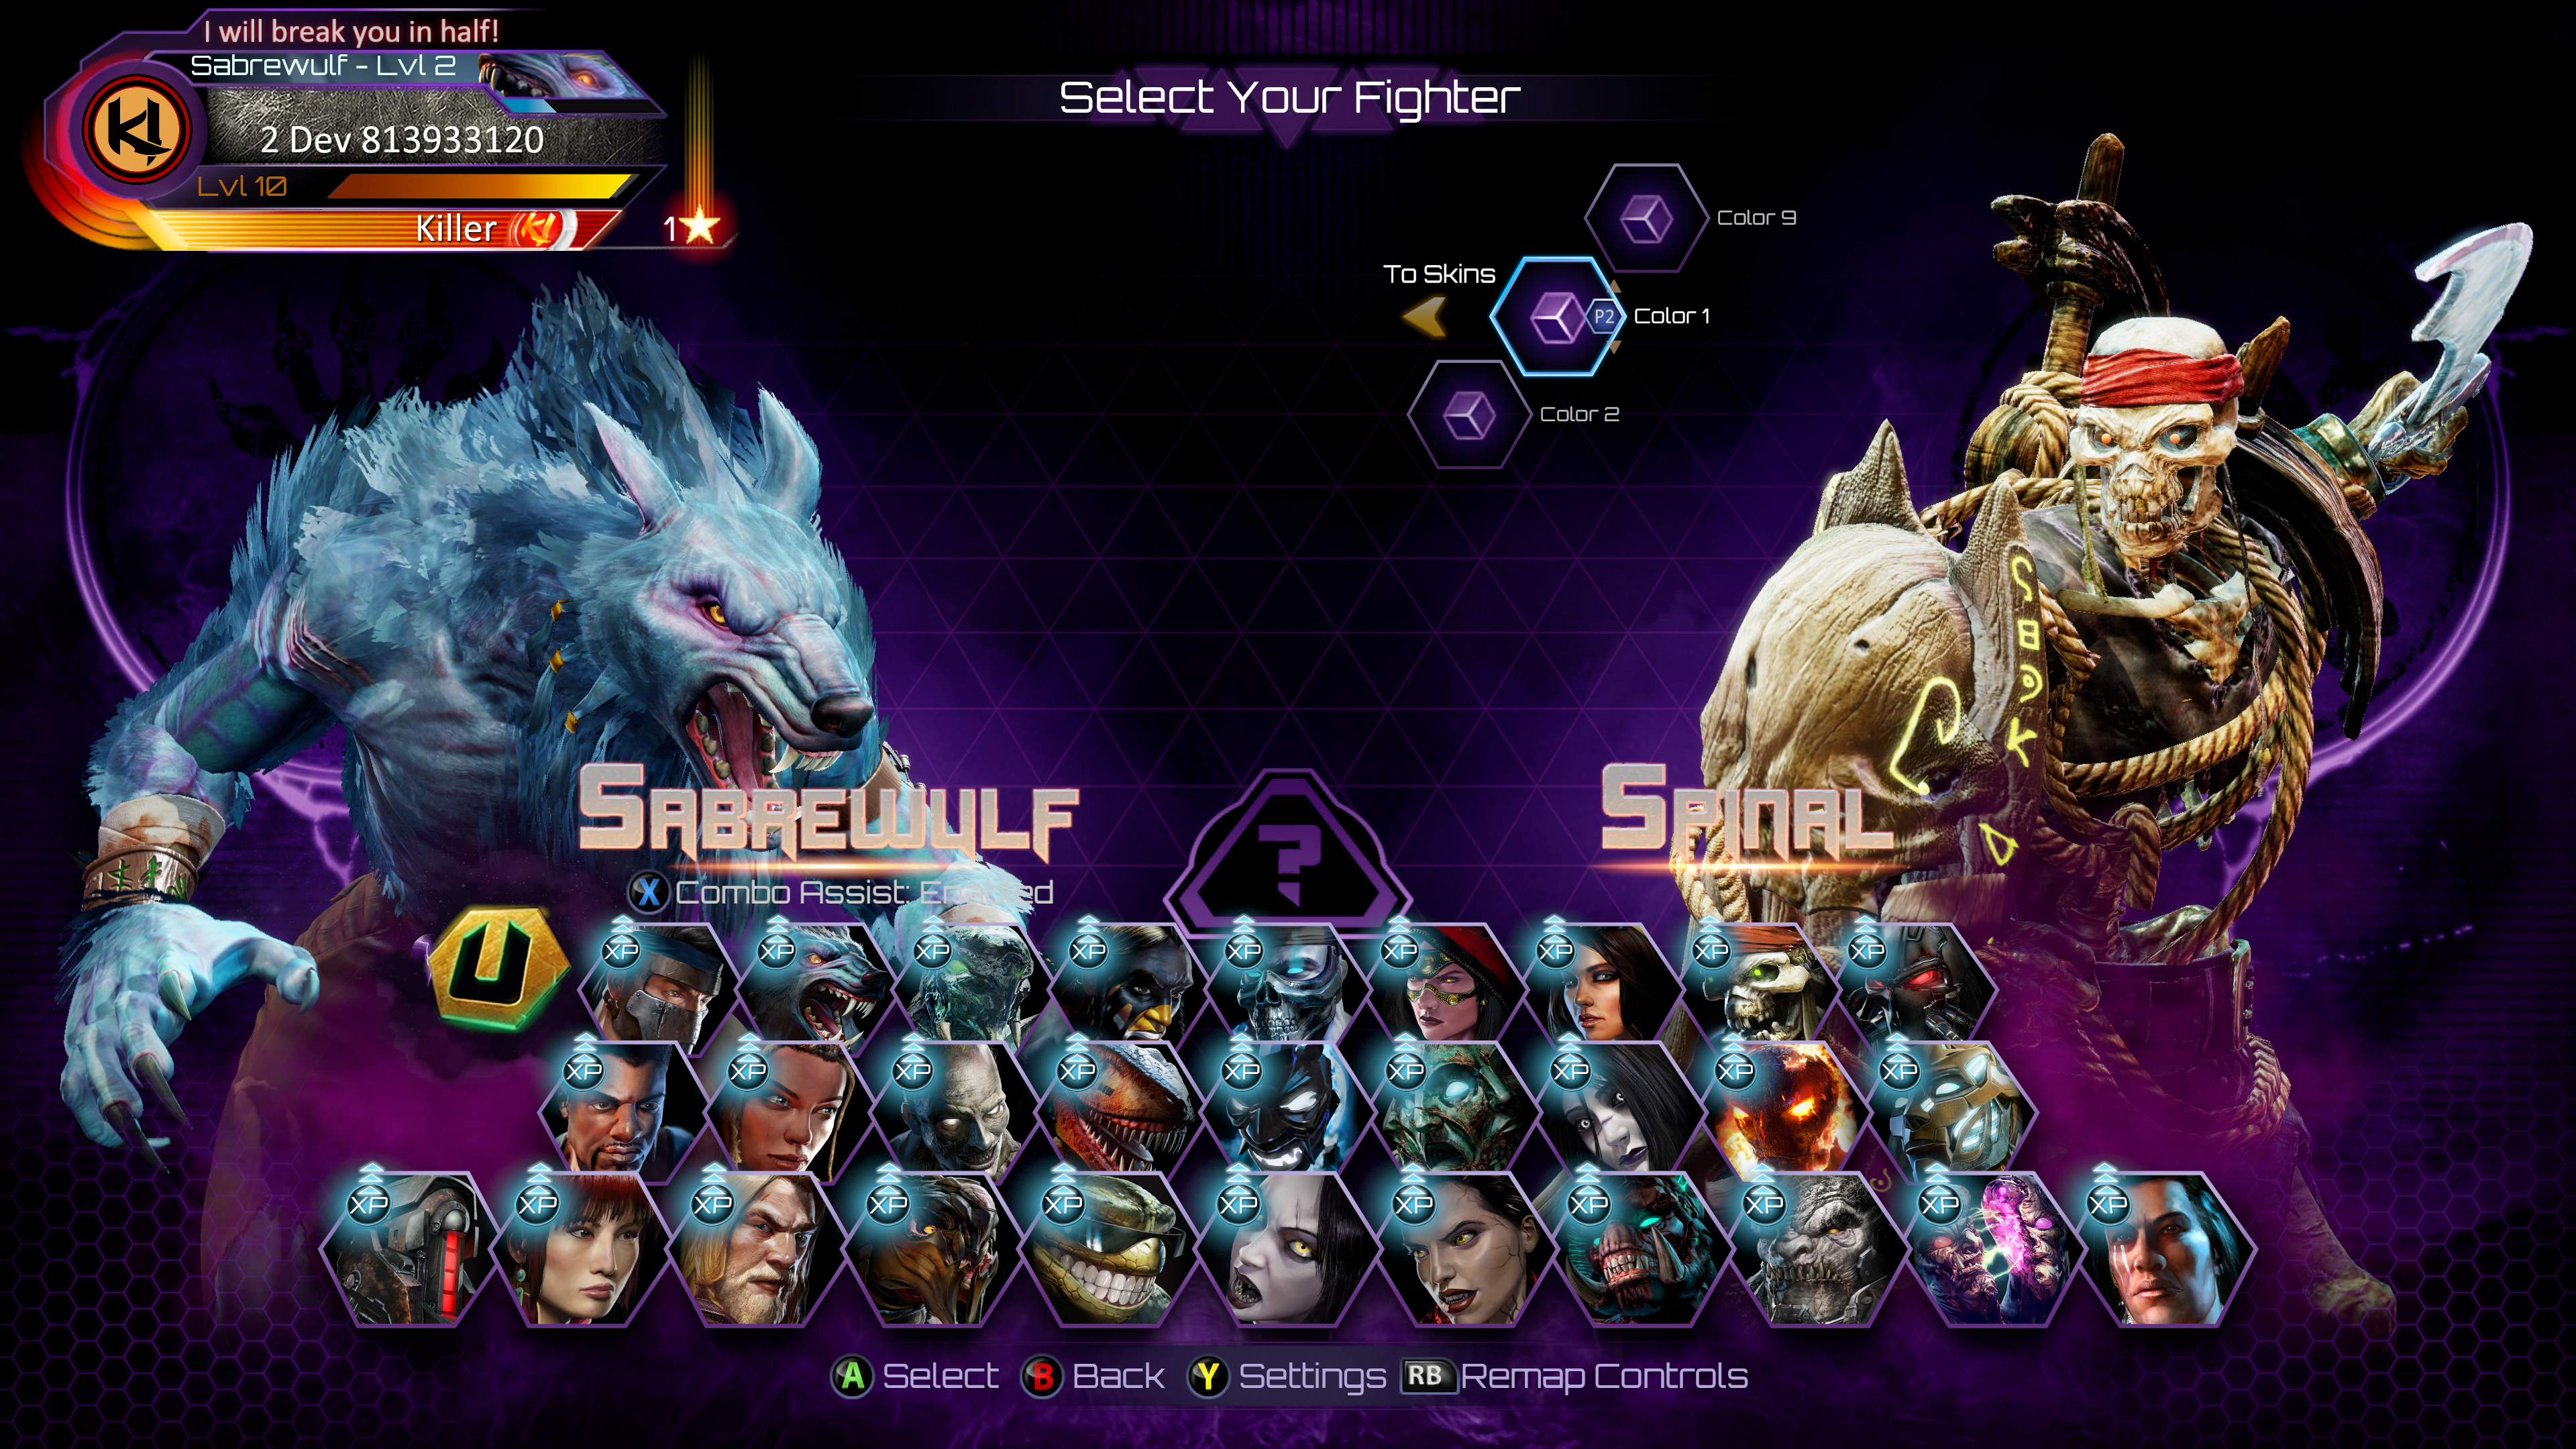 A full screen shot of the character select screen, featuring Sabrewulf for Player 1 and Spinal for Player 2.